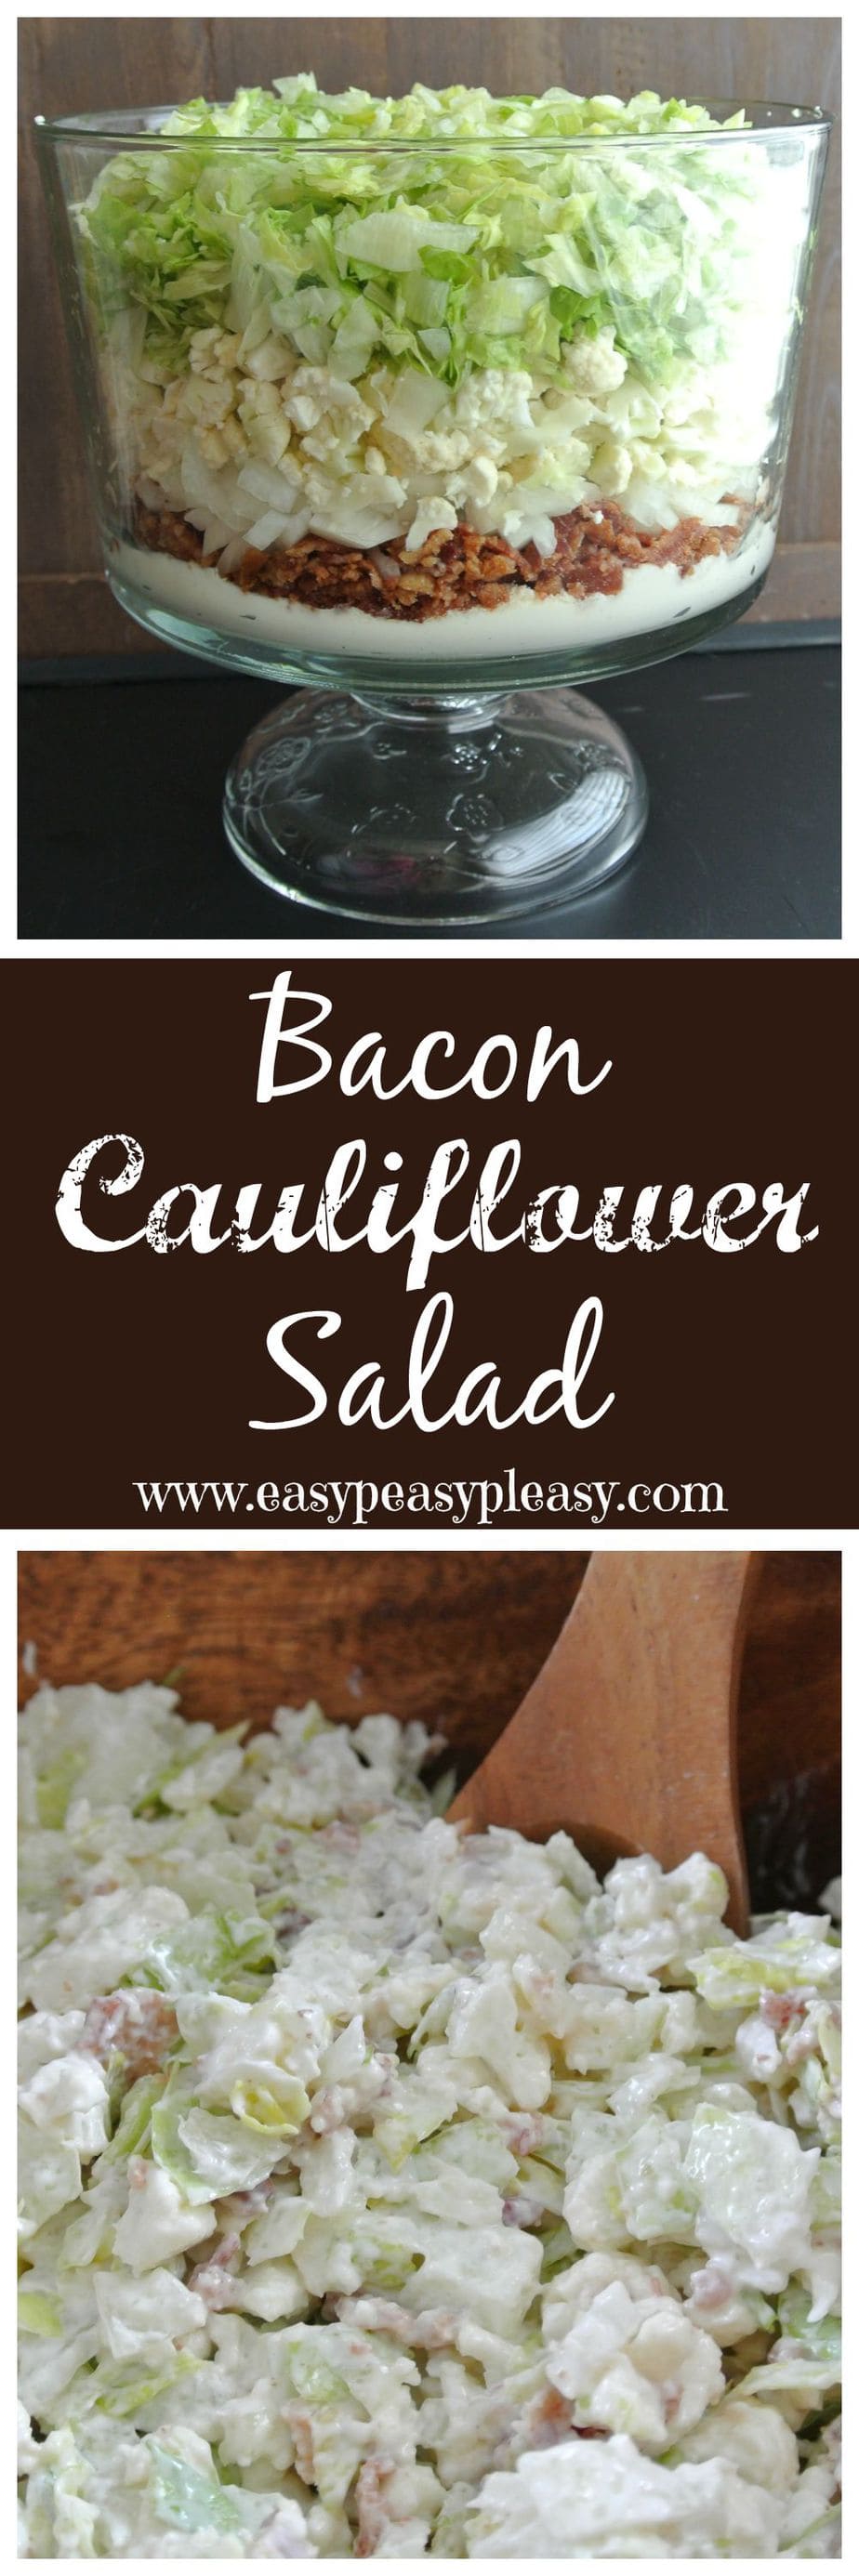 My husband isn't a cauliflower fan but he devours this salad! Bacon Cauliflower Salad is the perfect dish for your next cookout, potluck, or holiday. This salad will feed a crowd and is so delicious!